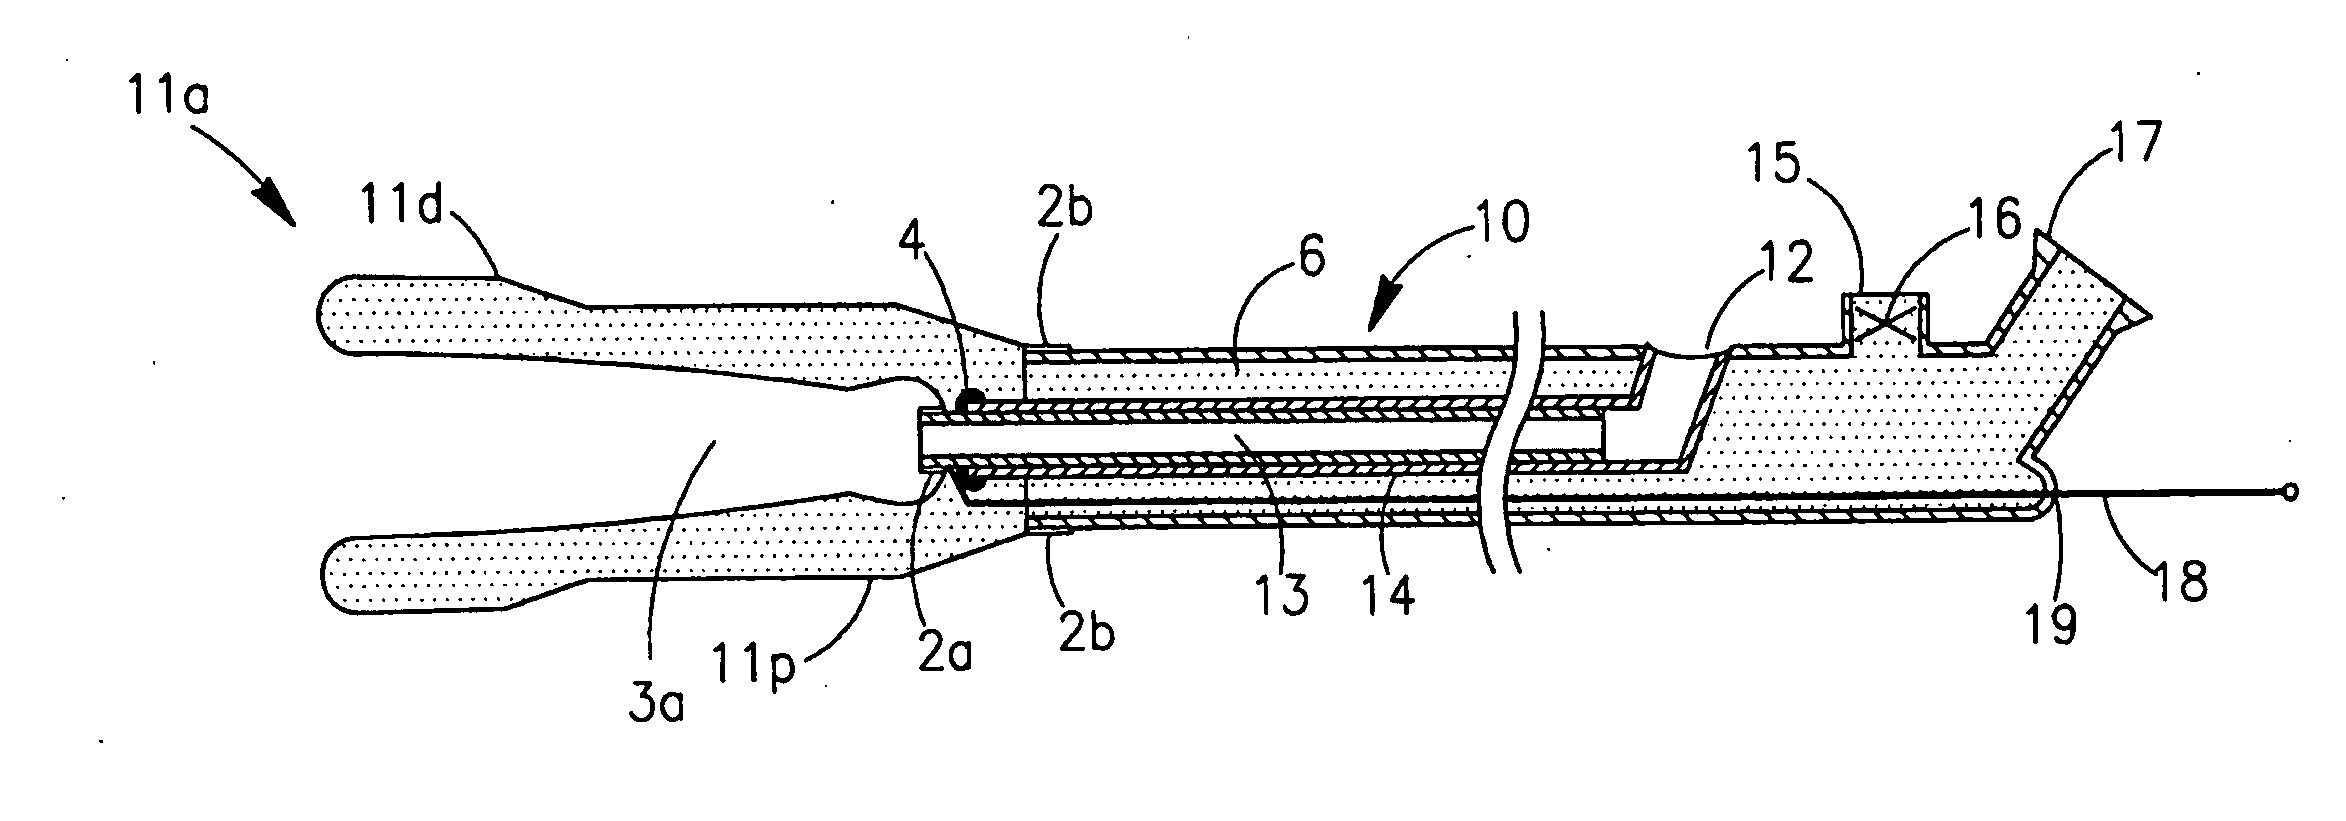 Intussuscepting balloon catheter and methods for constructing and using thereof